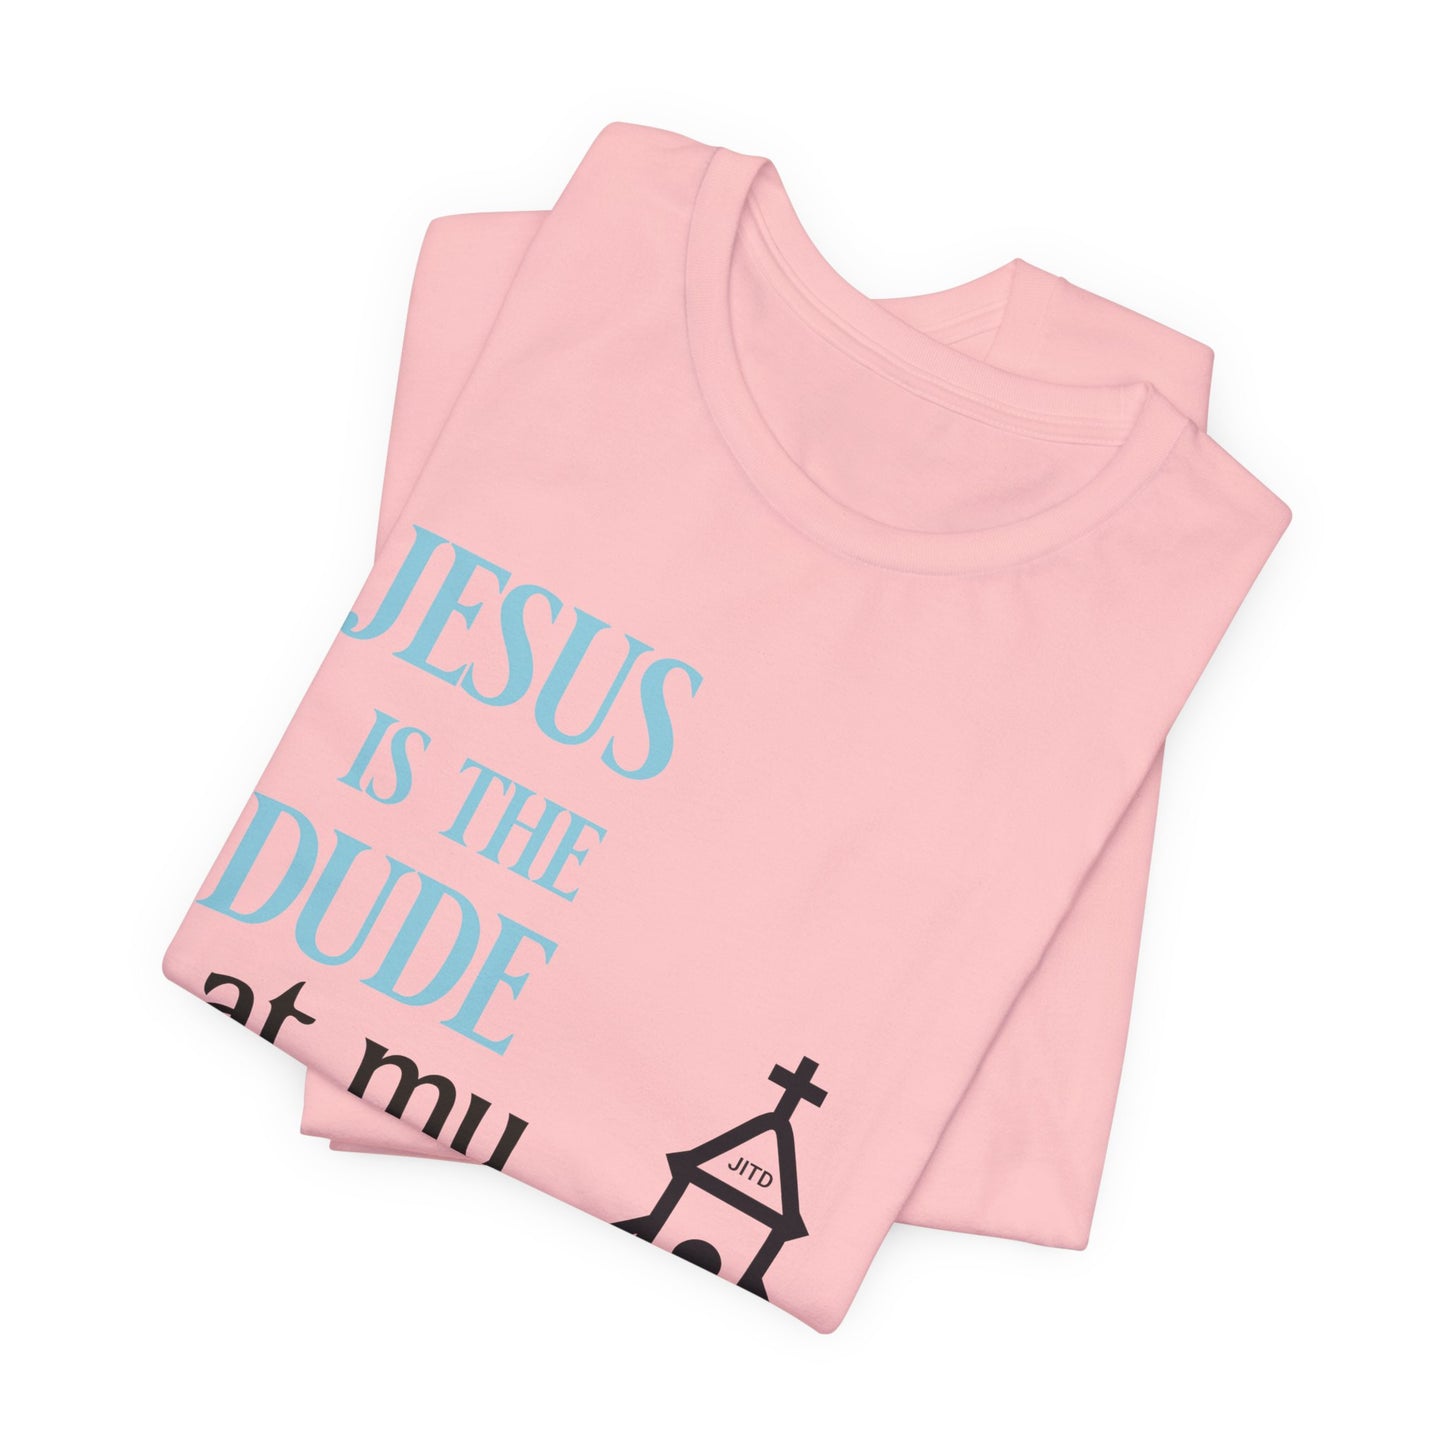 JESUS IS THE DUDE "AT MY CHURCH" UNISEX TEE